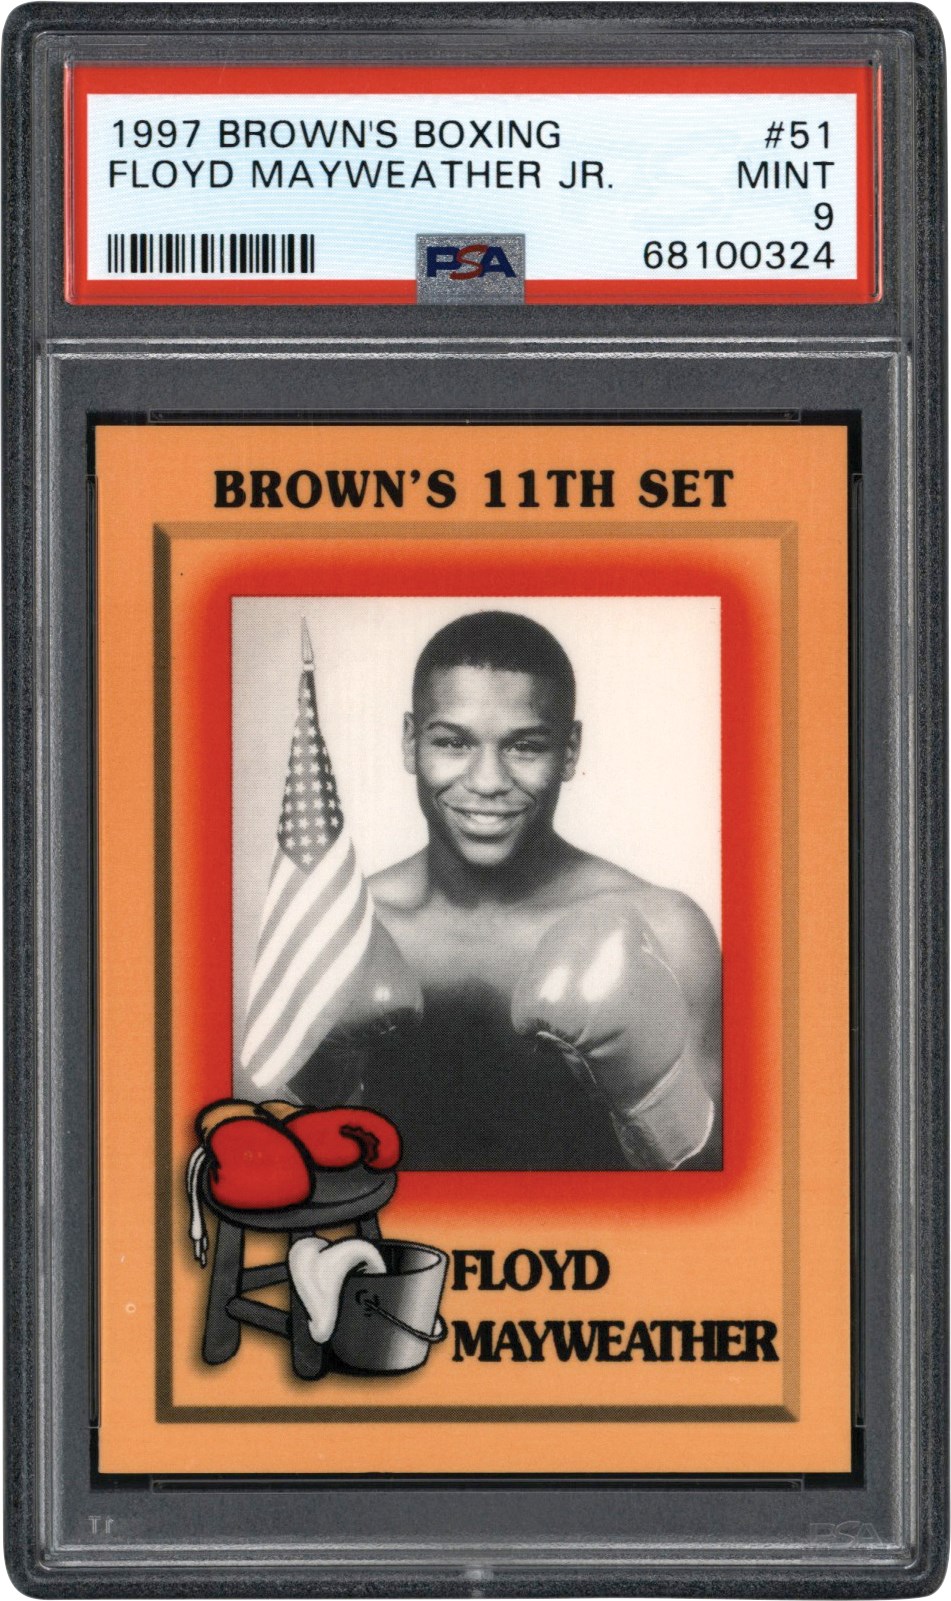 - 1997 Browns Boxing #51 Floyd Mayweather Rookie Card PSA MINT 9